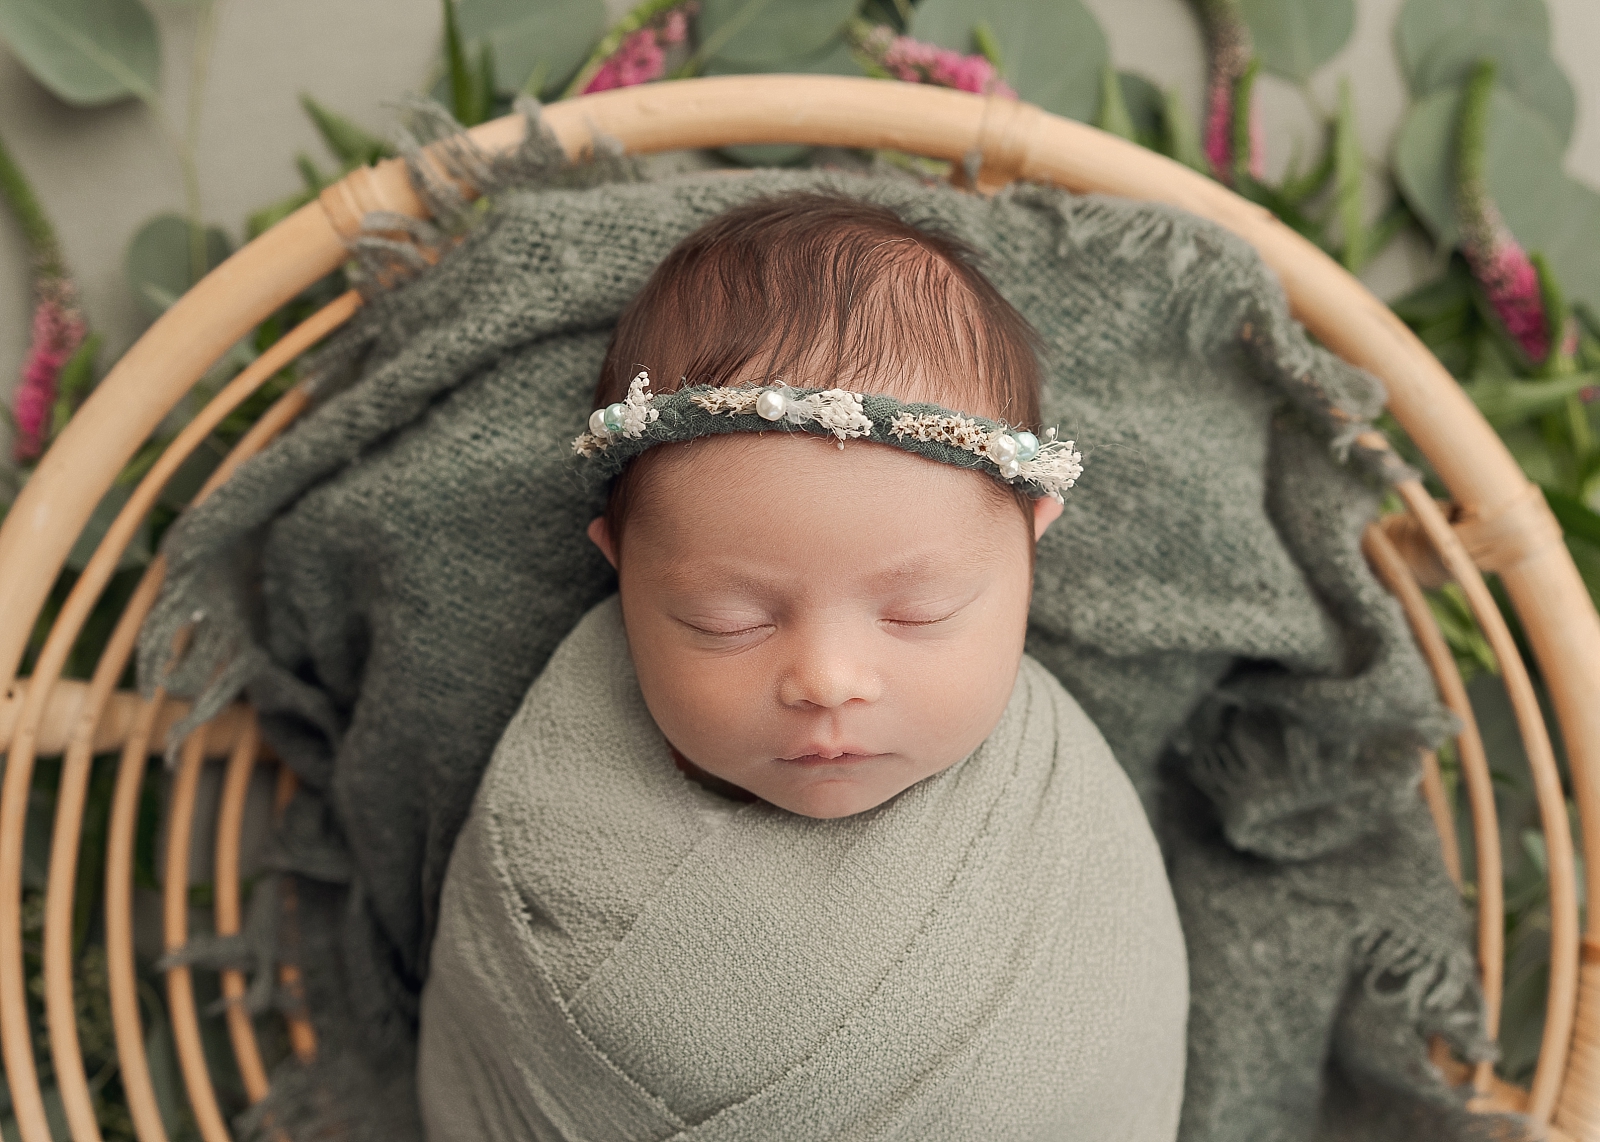 newborn baby girl wrapped in green with a headband laying in a basket